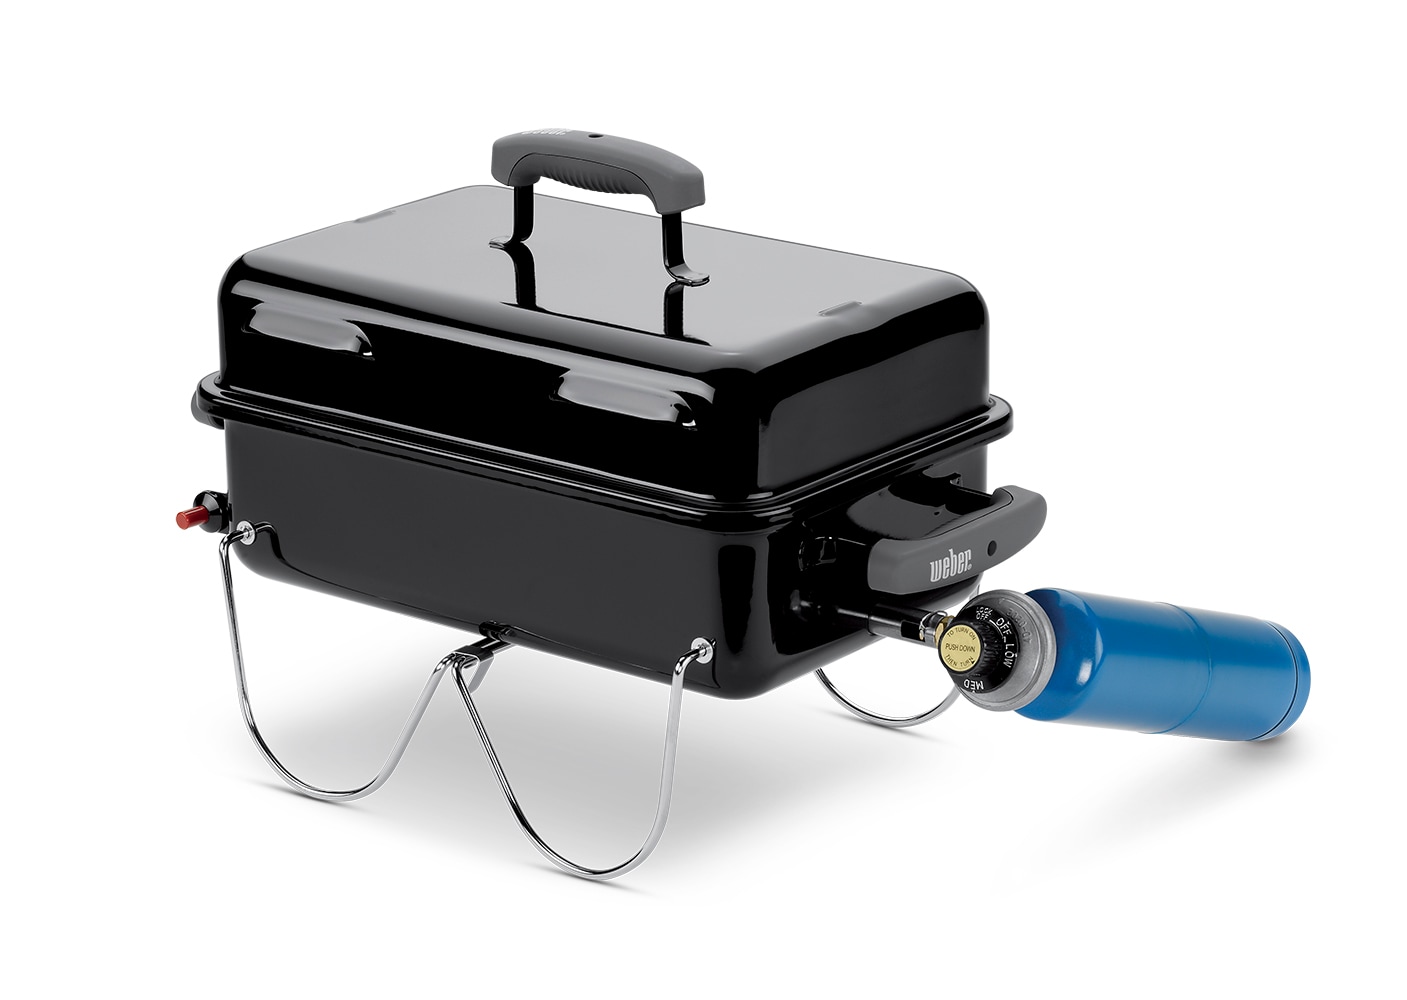 Weber 160-Sq in Black Portable Gas Grill the Grills at Lowes.com